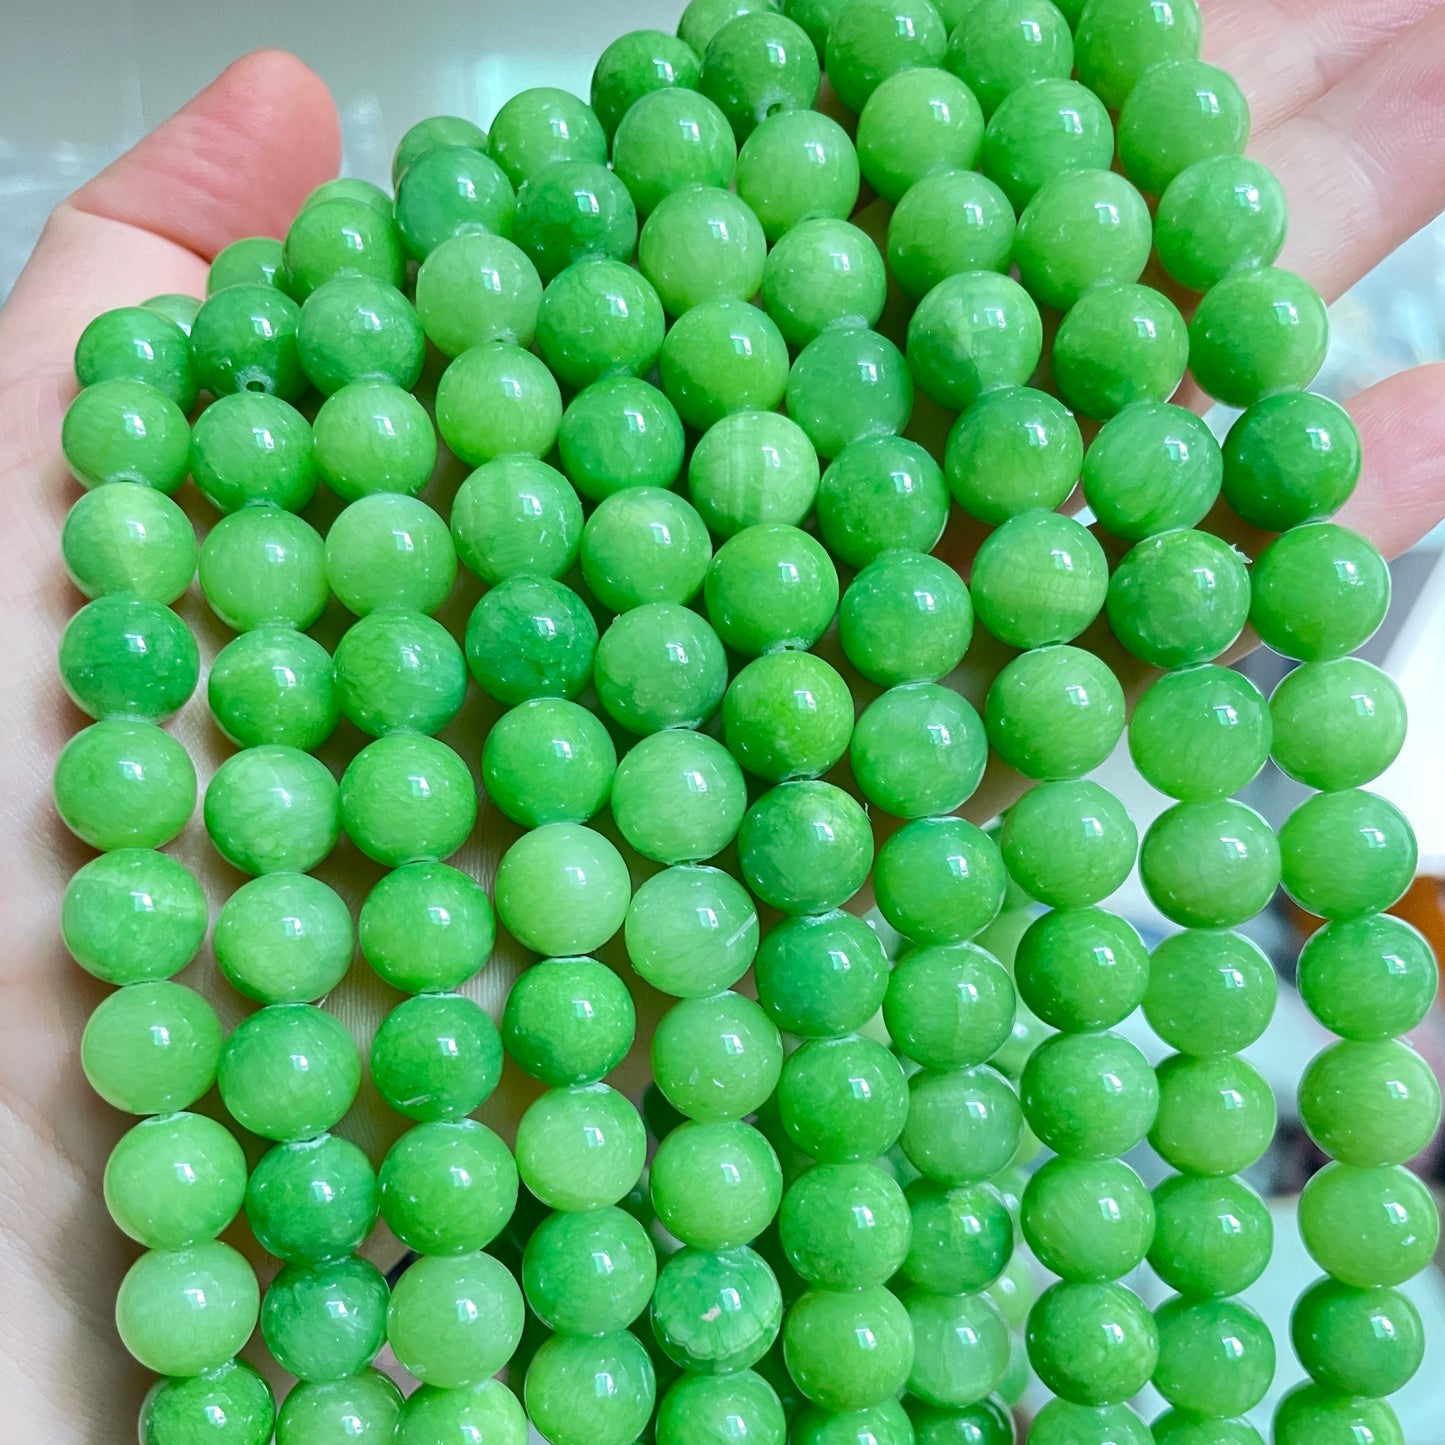 2 Strands/lot 8mm, 10mm Light Green Jade Round Stone Beads Stone Beads 8mm Stone Beads Round Jade Beads Charms Beads Beyond